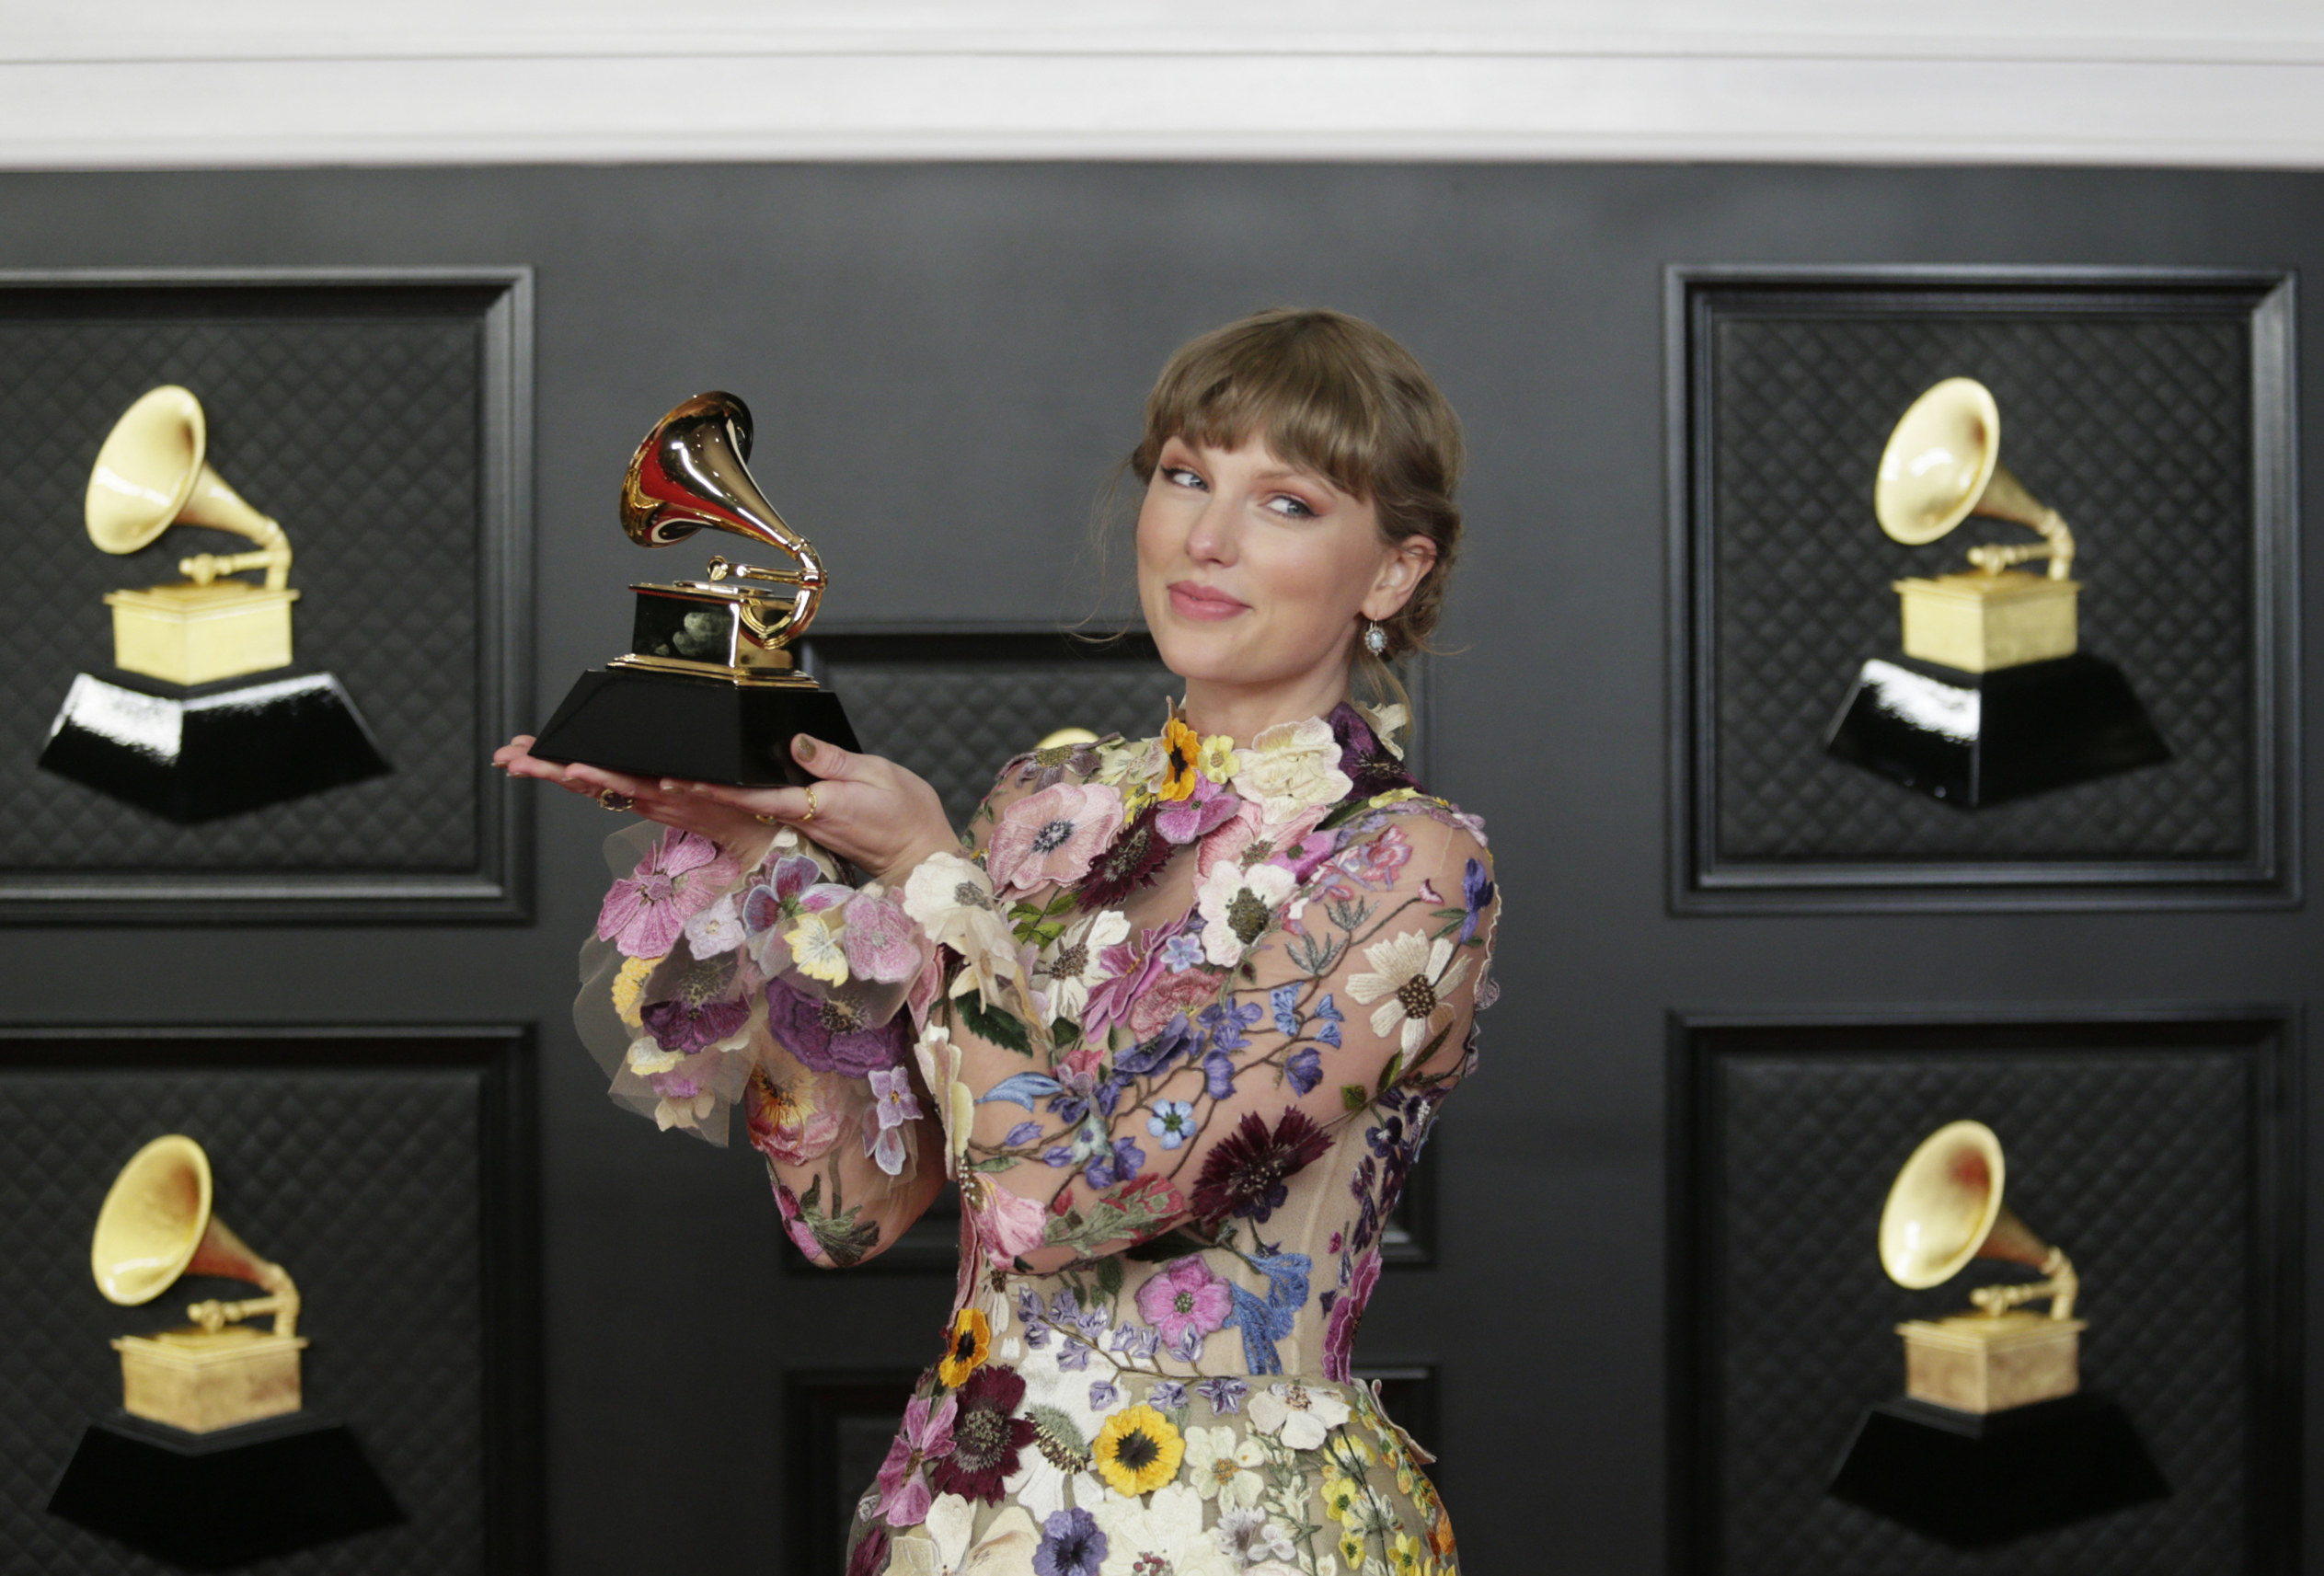 Taylor holding a Grammy on the red carpet